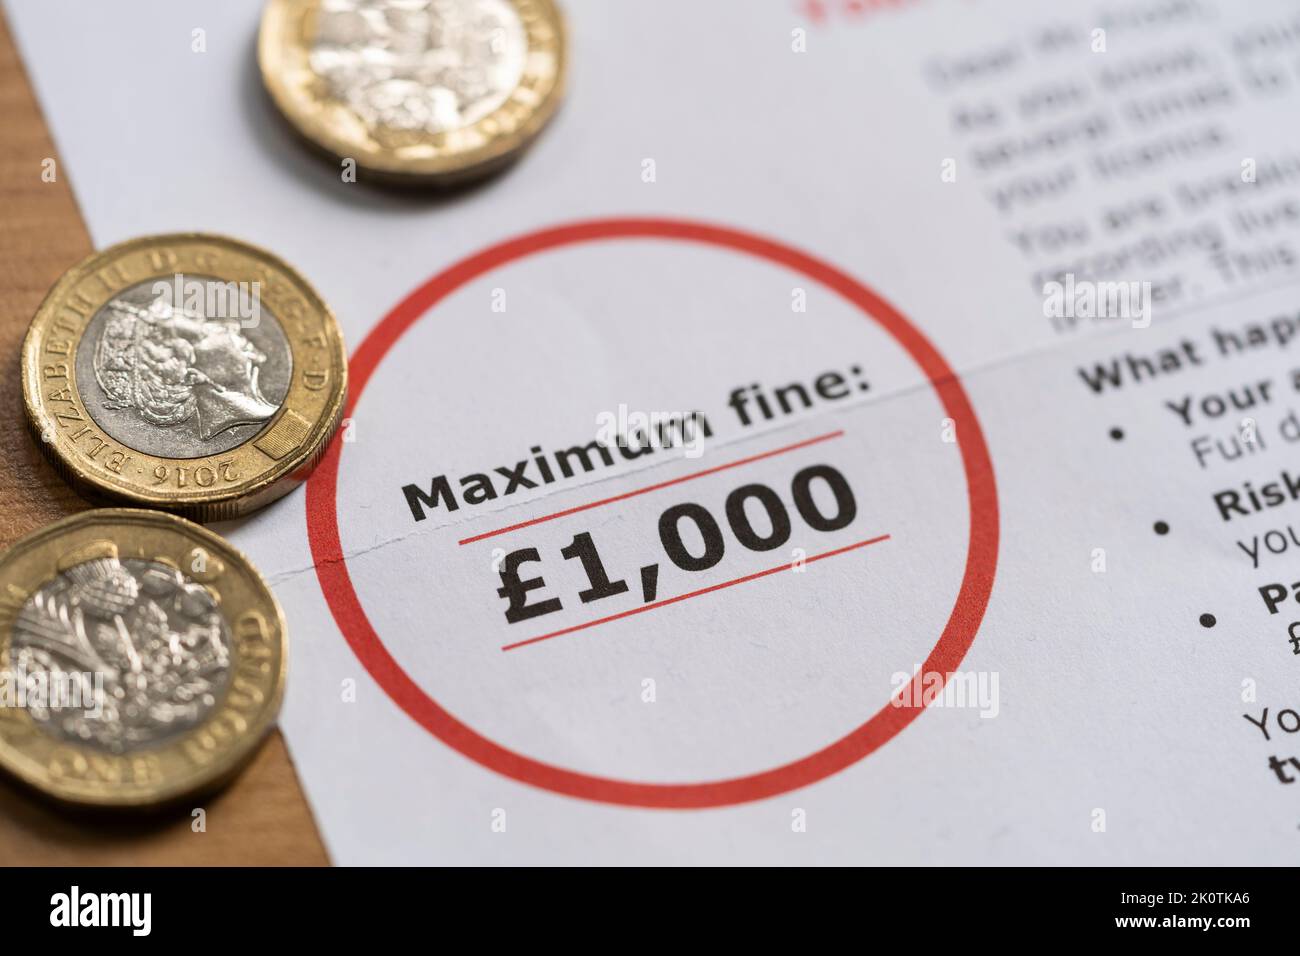 TV licensing Under Investigation letter for late / non payment of the BBC TV license fee warning of a maximum fine of £1000, with pound coins Stock Photo